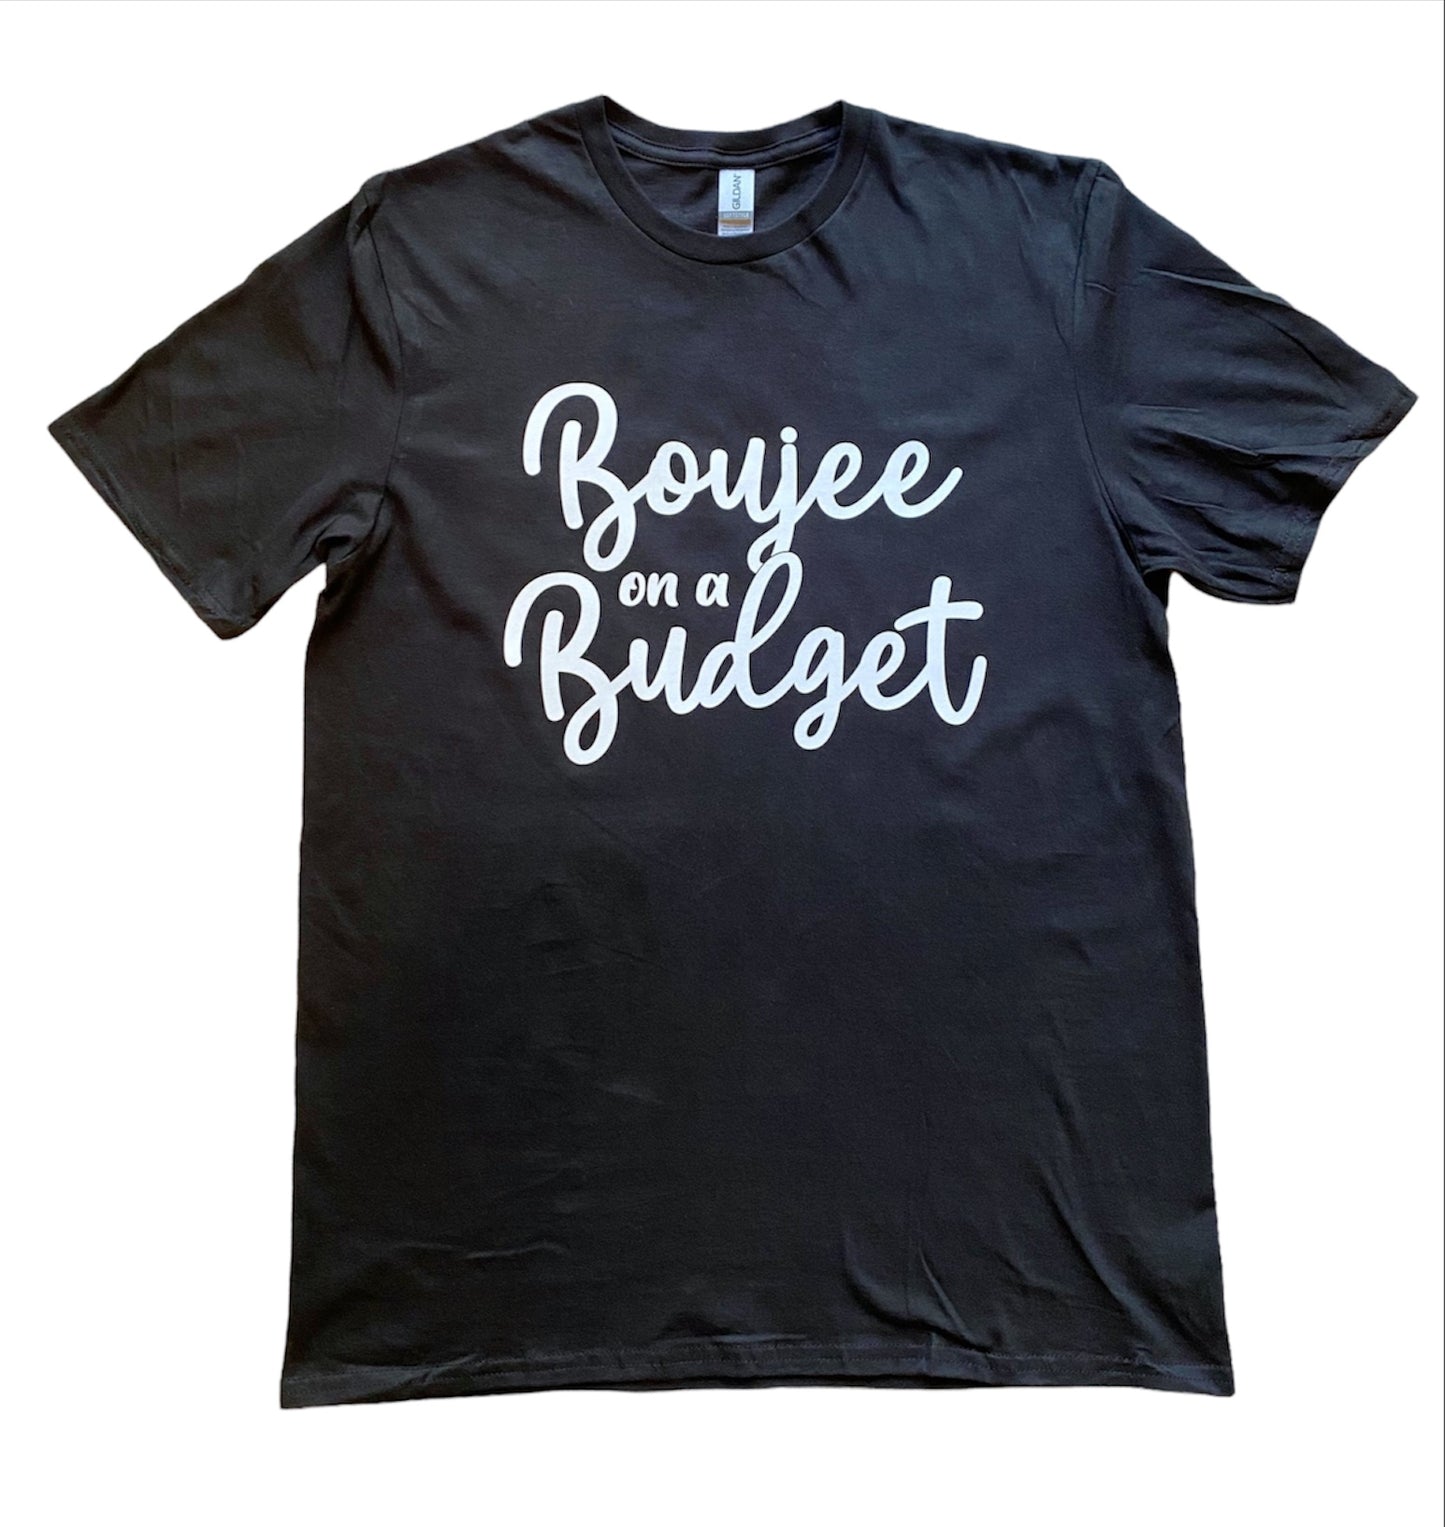 Boujee on a budget tshirt